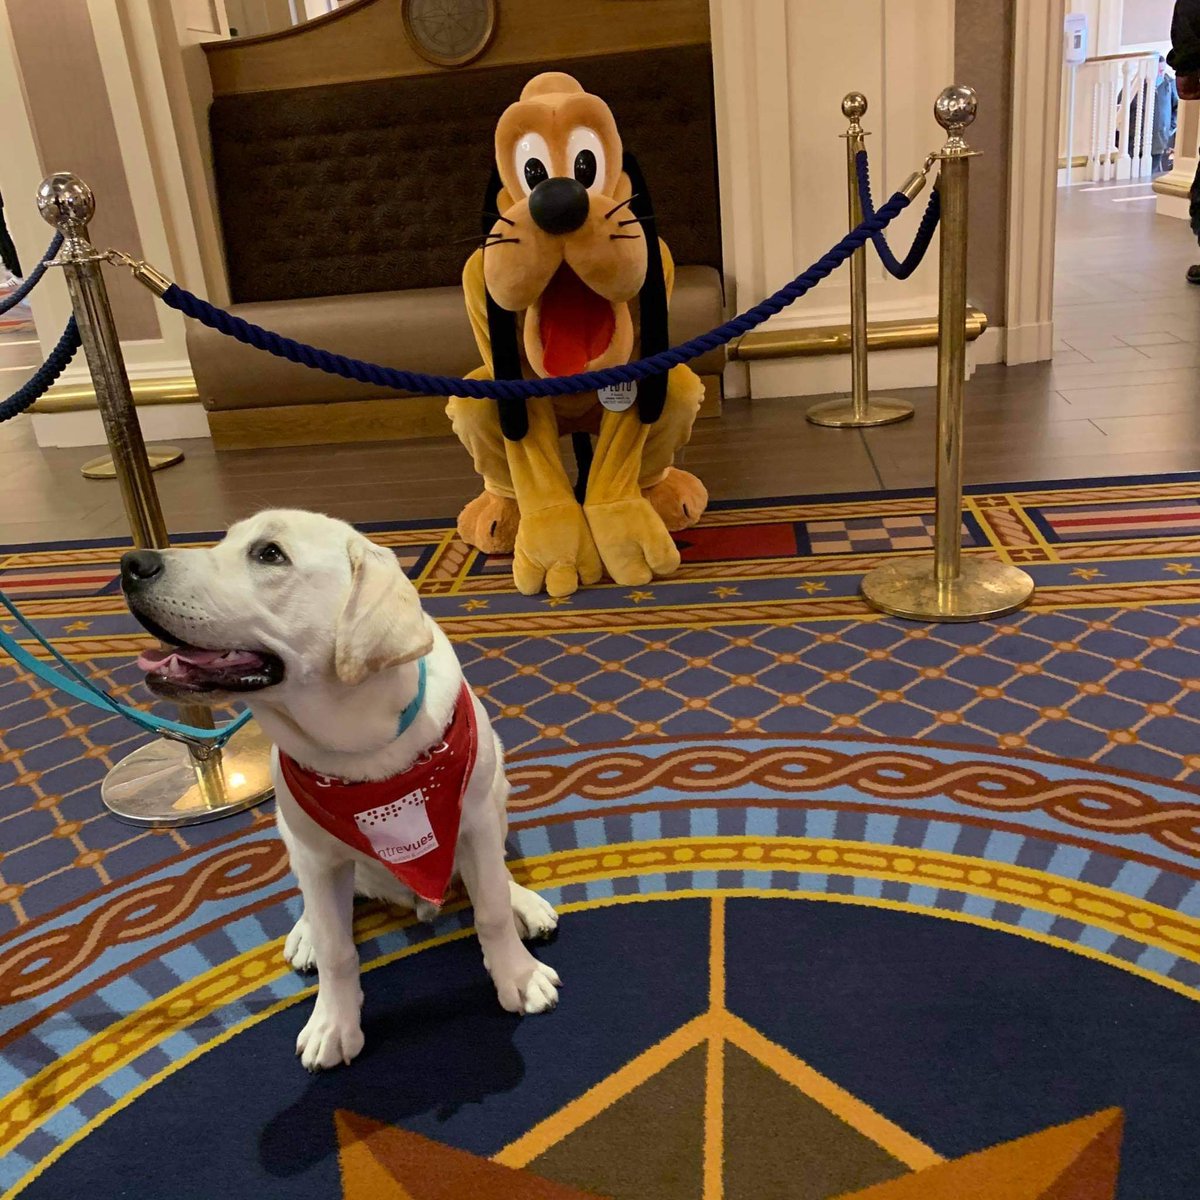 It's his first time at Disney, so it's all new for him but he is very well behaved. The aim is to familiarise him with new noises, attractions, crowds ect so he can handle busy situations.